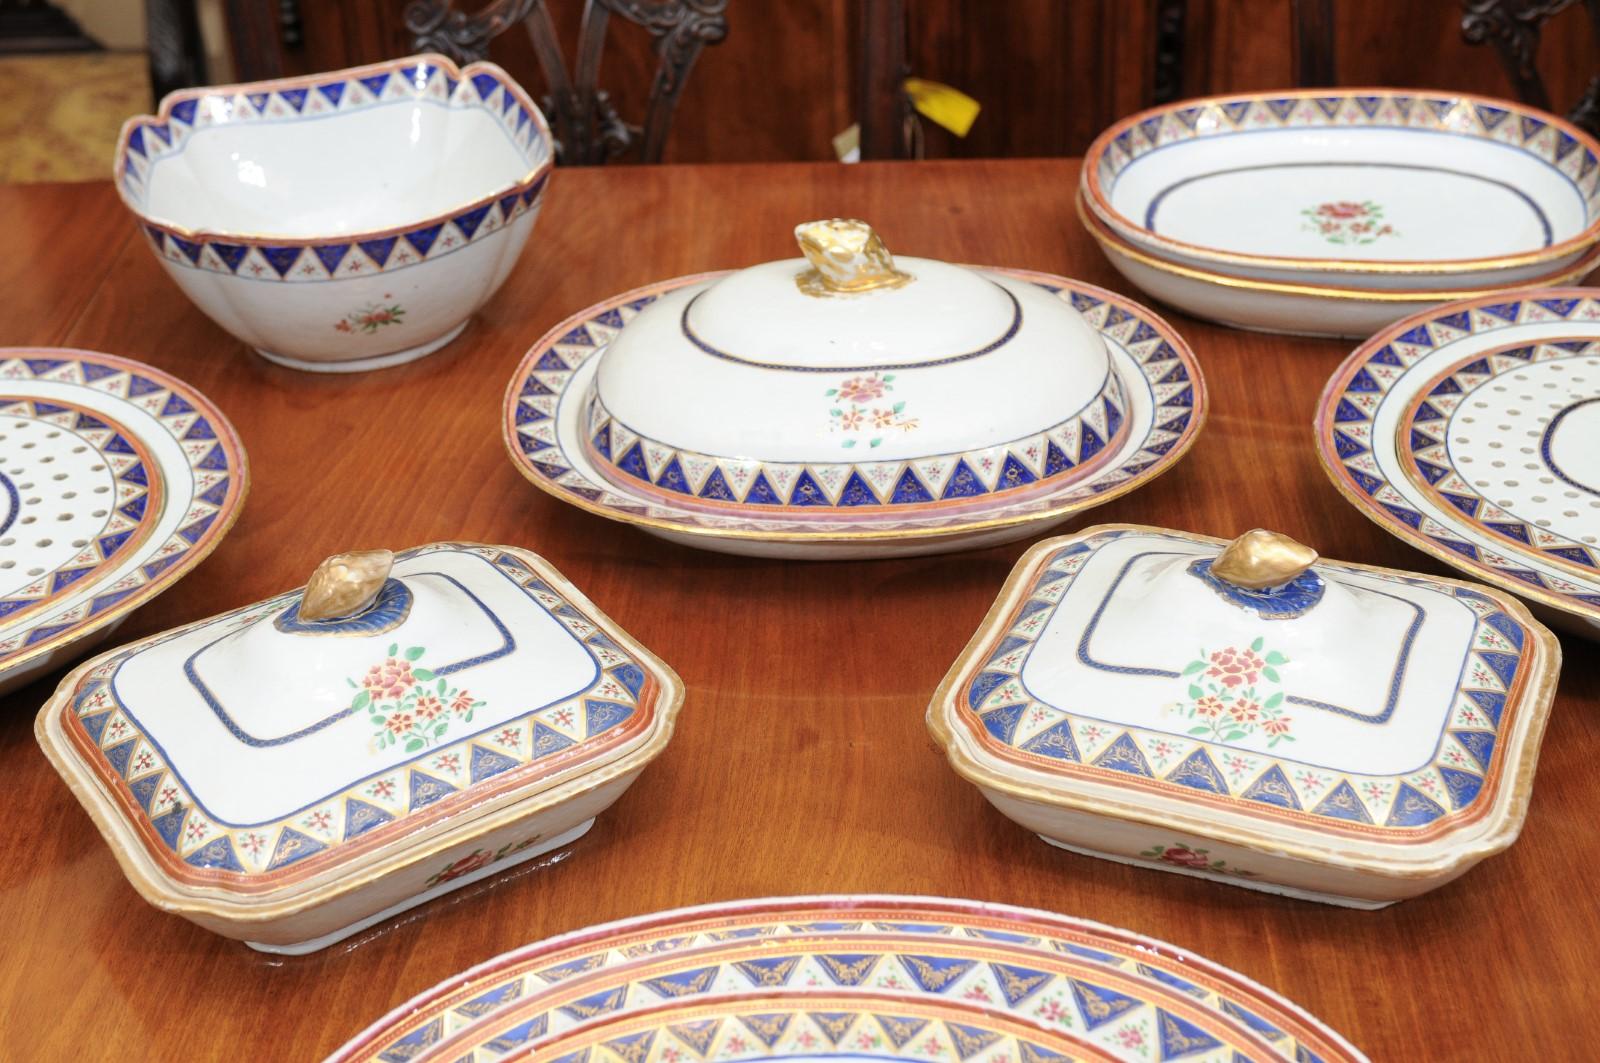 19th Century 19th C. Chinese Export Famille Rose Porcelain Part-Dinner Service, 45 Piece Set For Sale